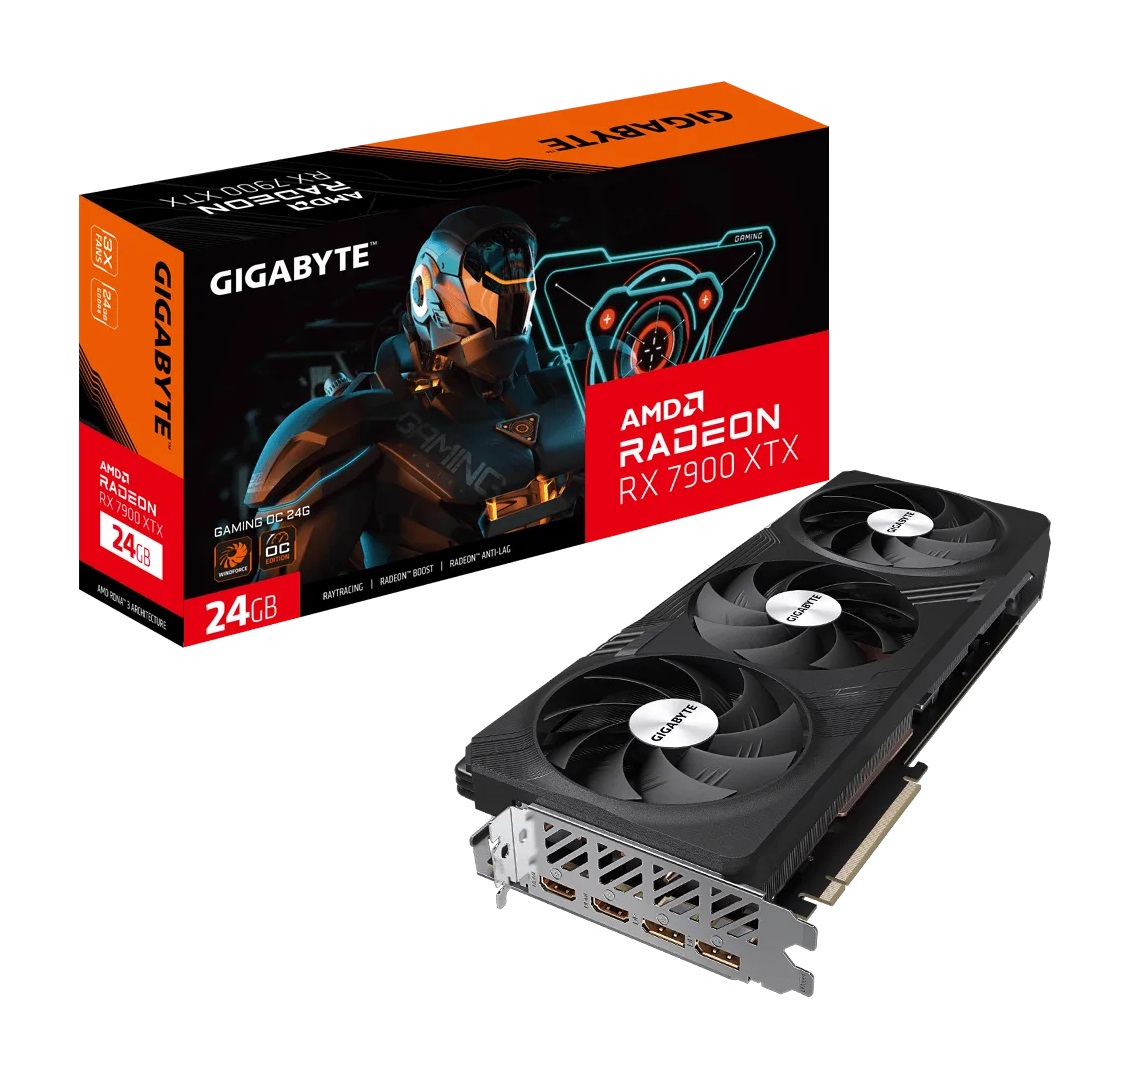  AMD Radeon RX 7900 XTX GAMING OC 24G<br>Boost Clock: 2525 MHz, 2x HDMI/ 2x DP, Max Resolution: 7680X4320, 2x 8-Pin Connector, Recommended: 850W  